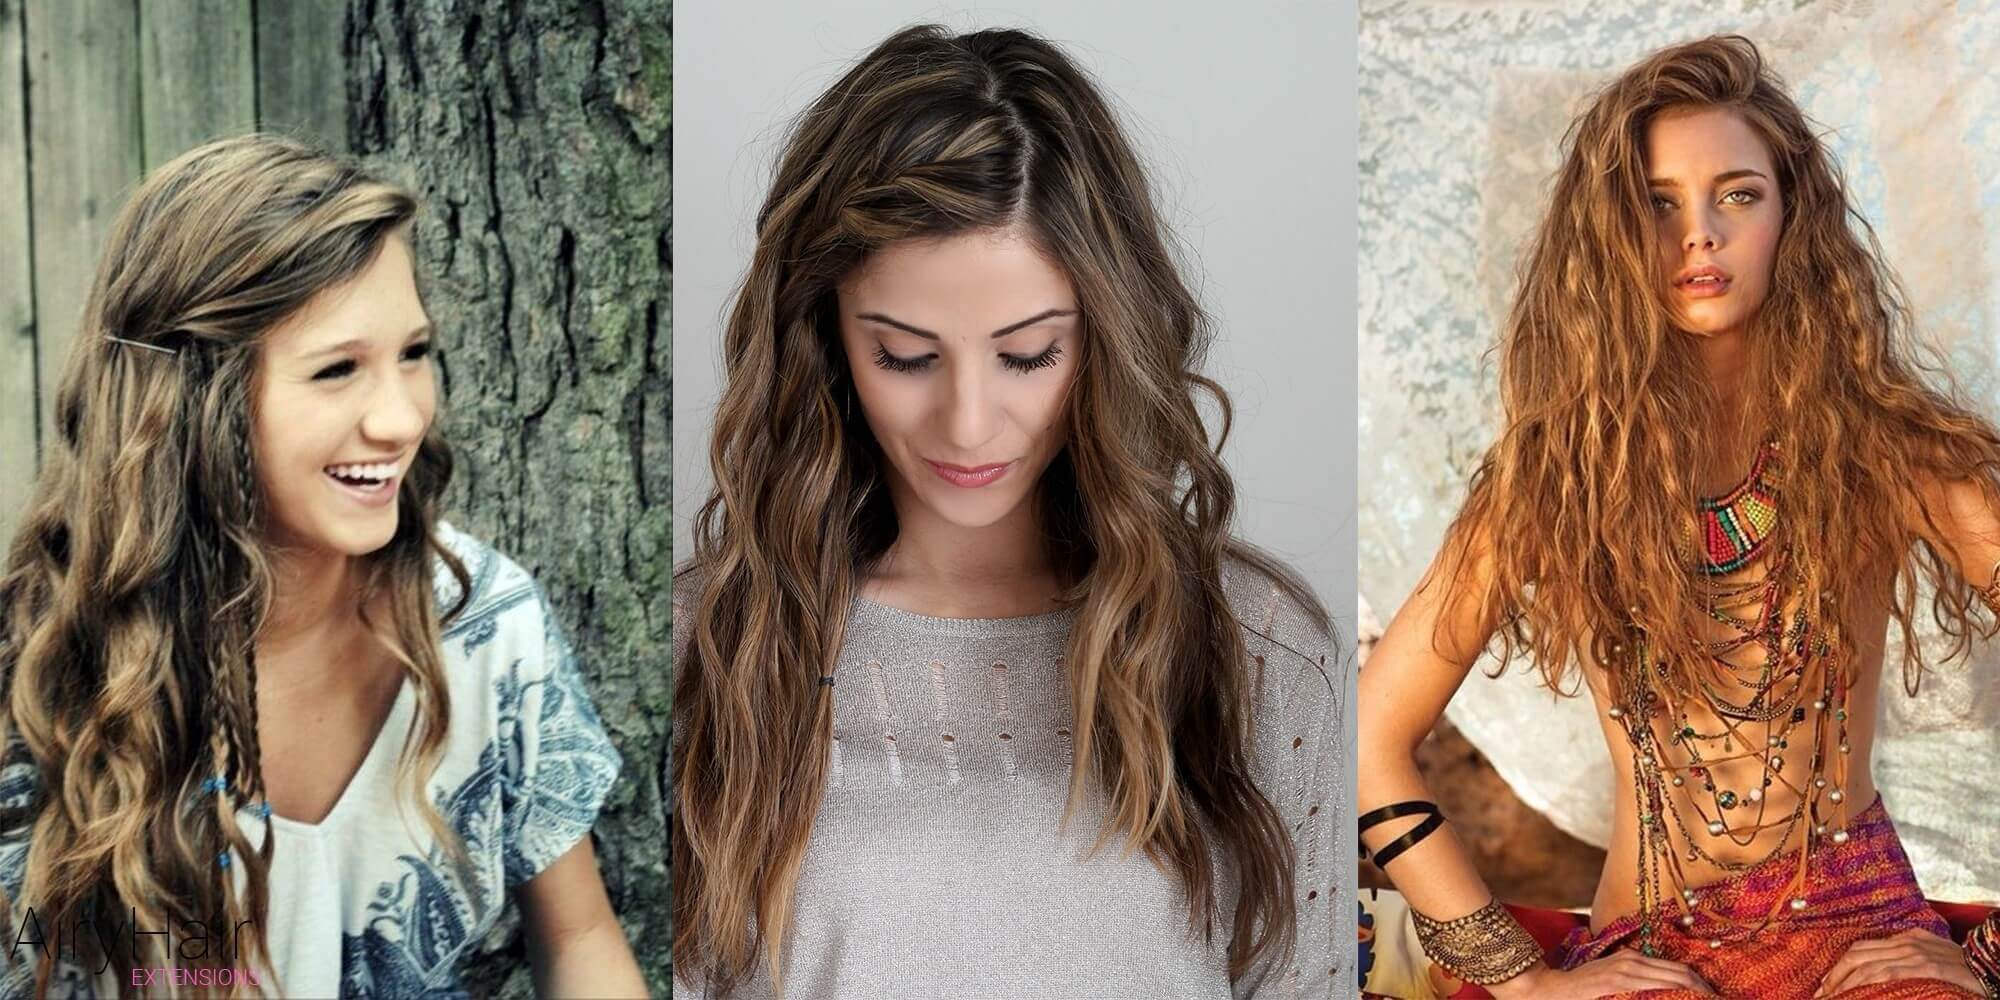 What Are The Different Types Of Boho Hairstyle?